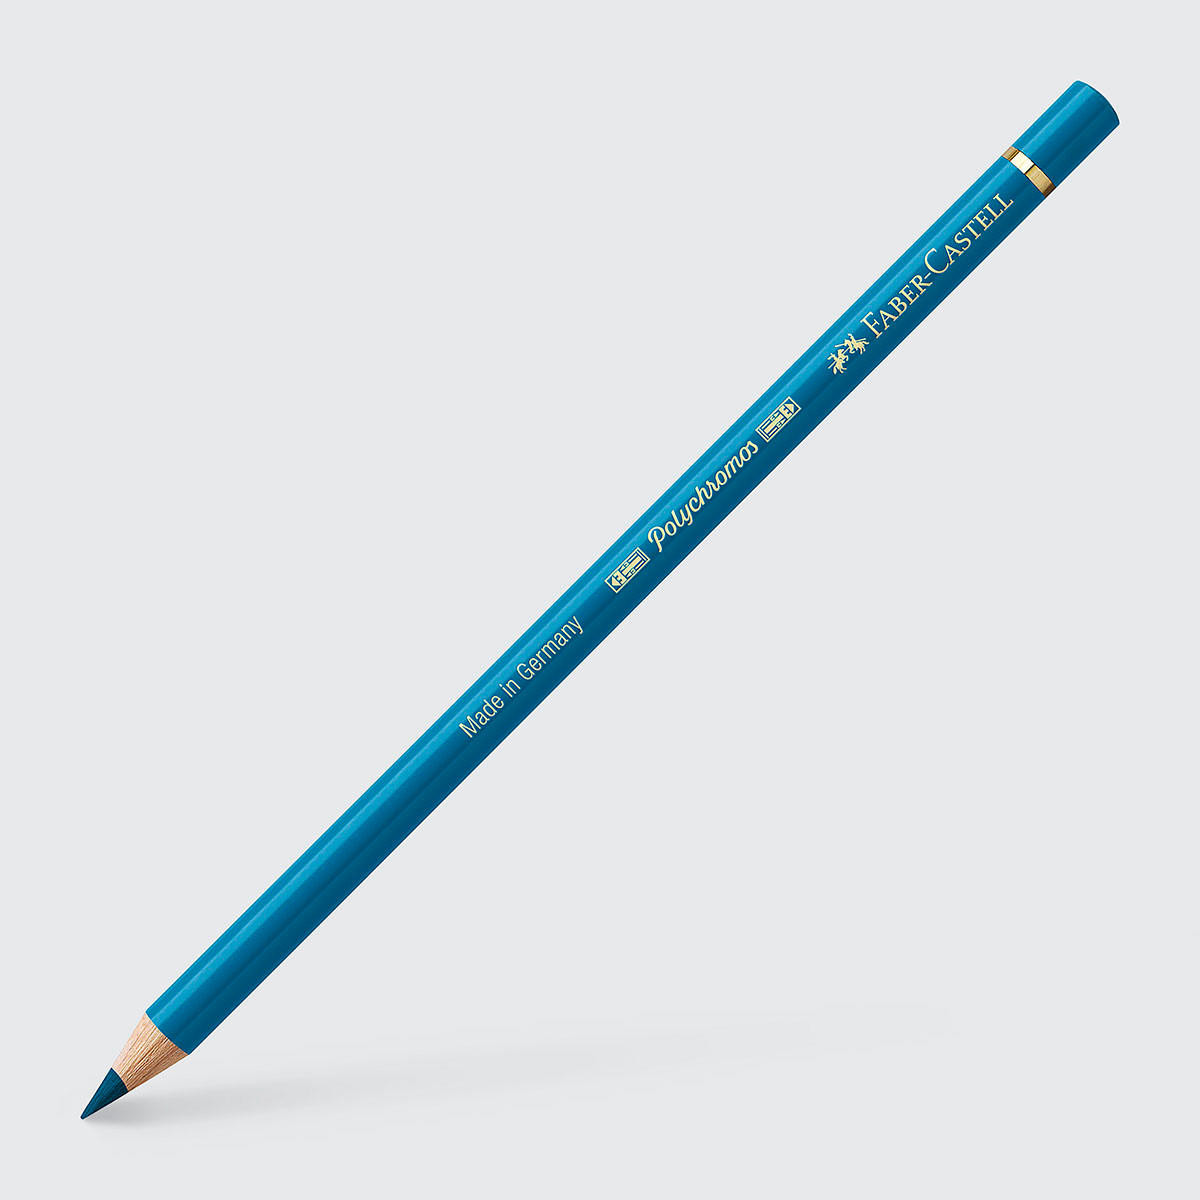 Faber-Castell Polychromos Artists’ Coloured Pencil One Size Cobalt Turquoise (153)